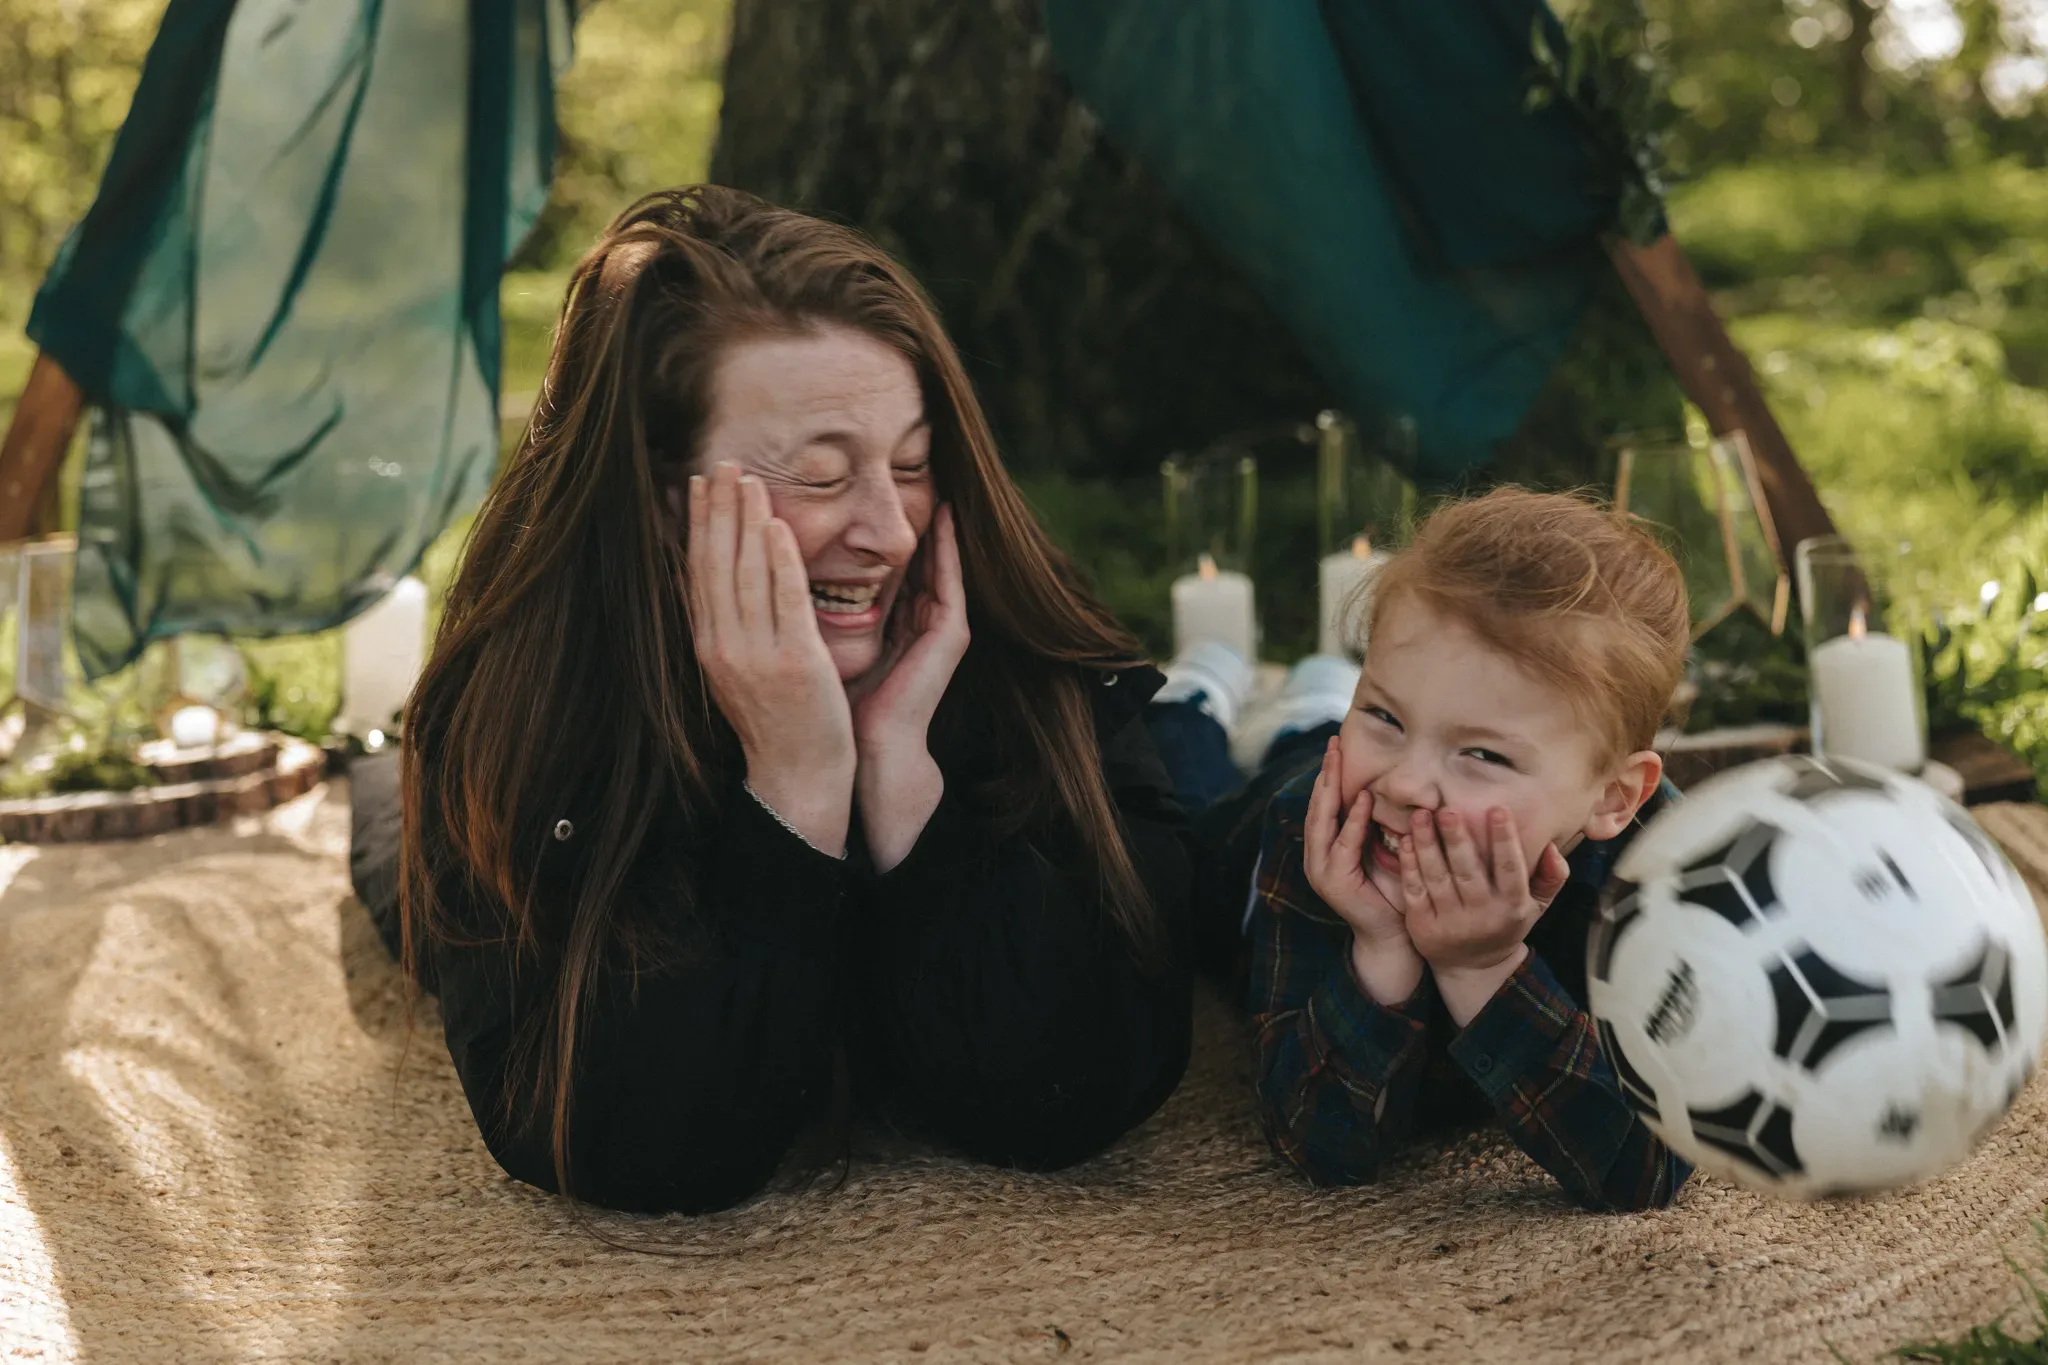 A woman and a young boy laugh joyously while lying on a blanket outdoors, with a soccer ball nearby. both are holding their faces in delight, surrounded by a green, sunlit park setting with soft focus in the background.